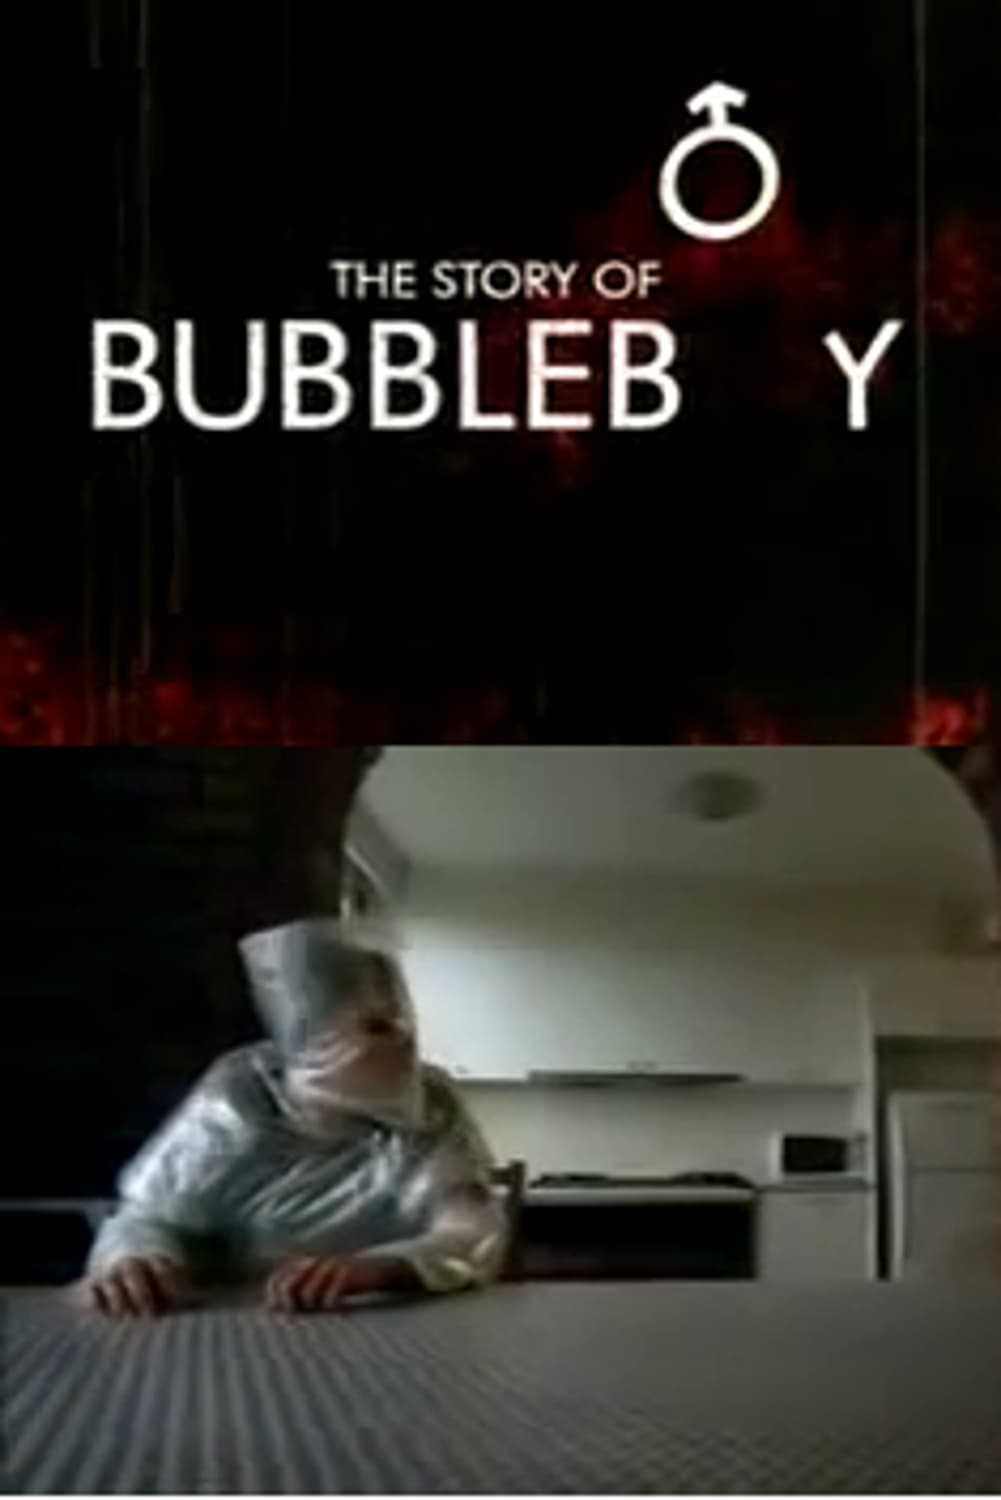 The Story of Bubbleboy